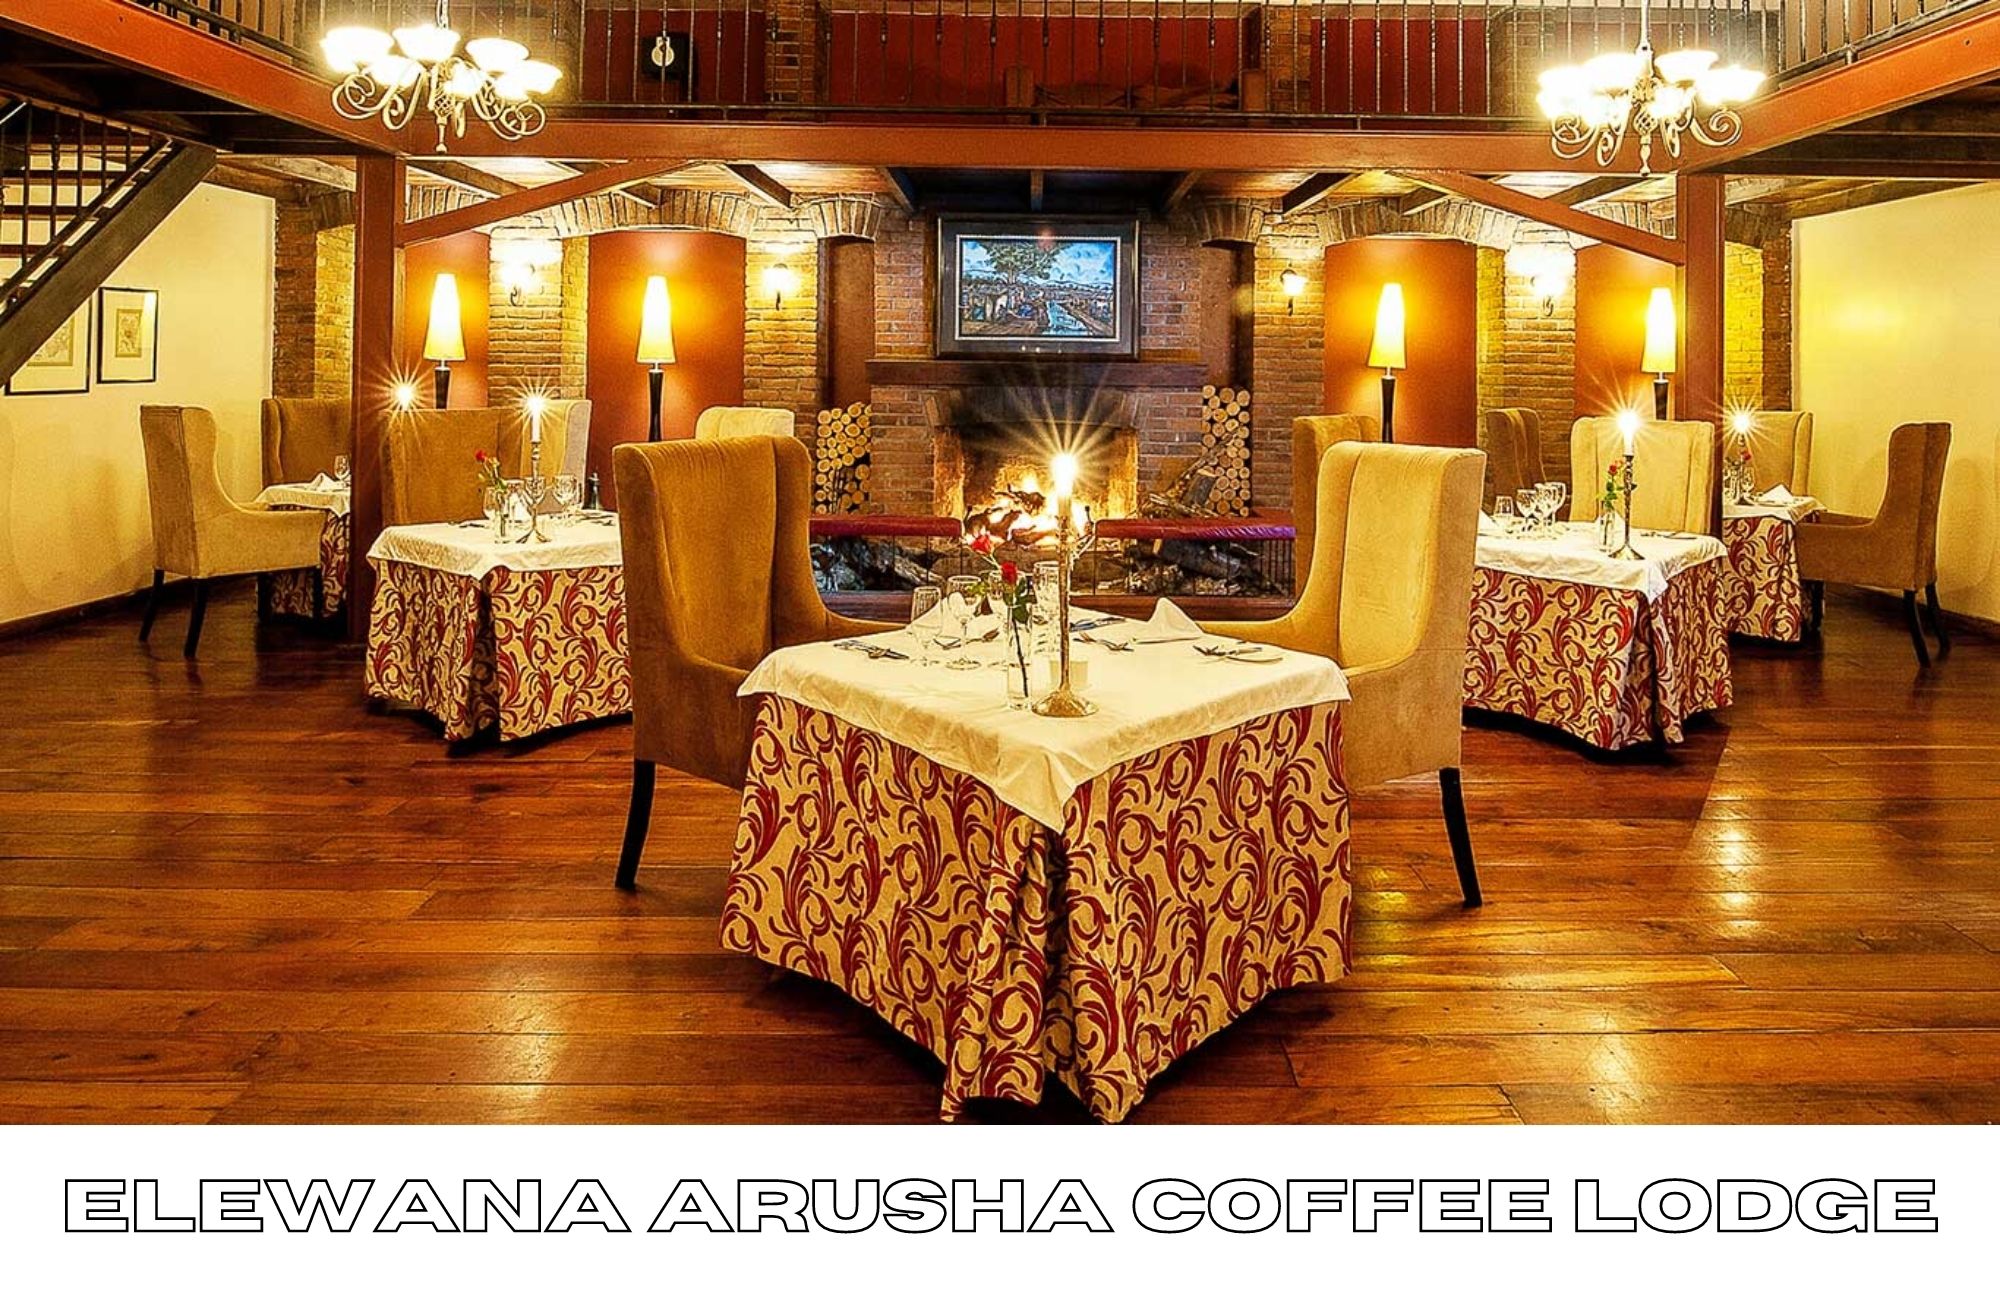 Elewana Coffee Lodge's interior features well-designed table and chairs, two chandeliers, and orange-yellow lighting